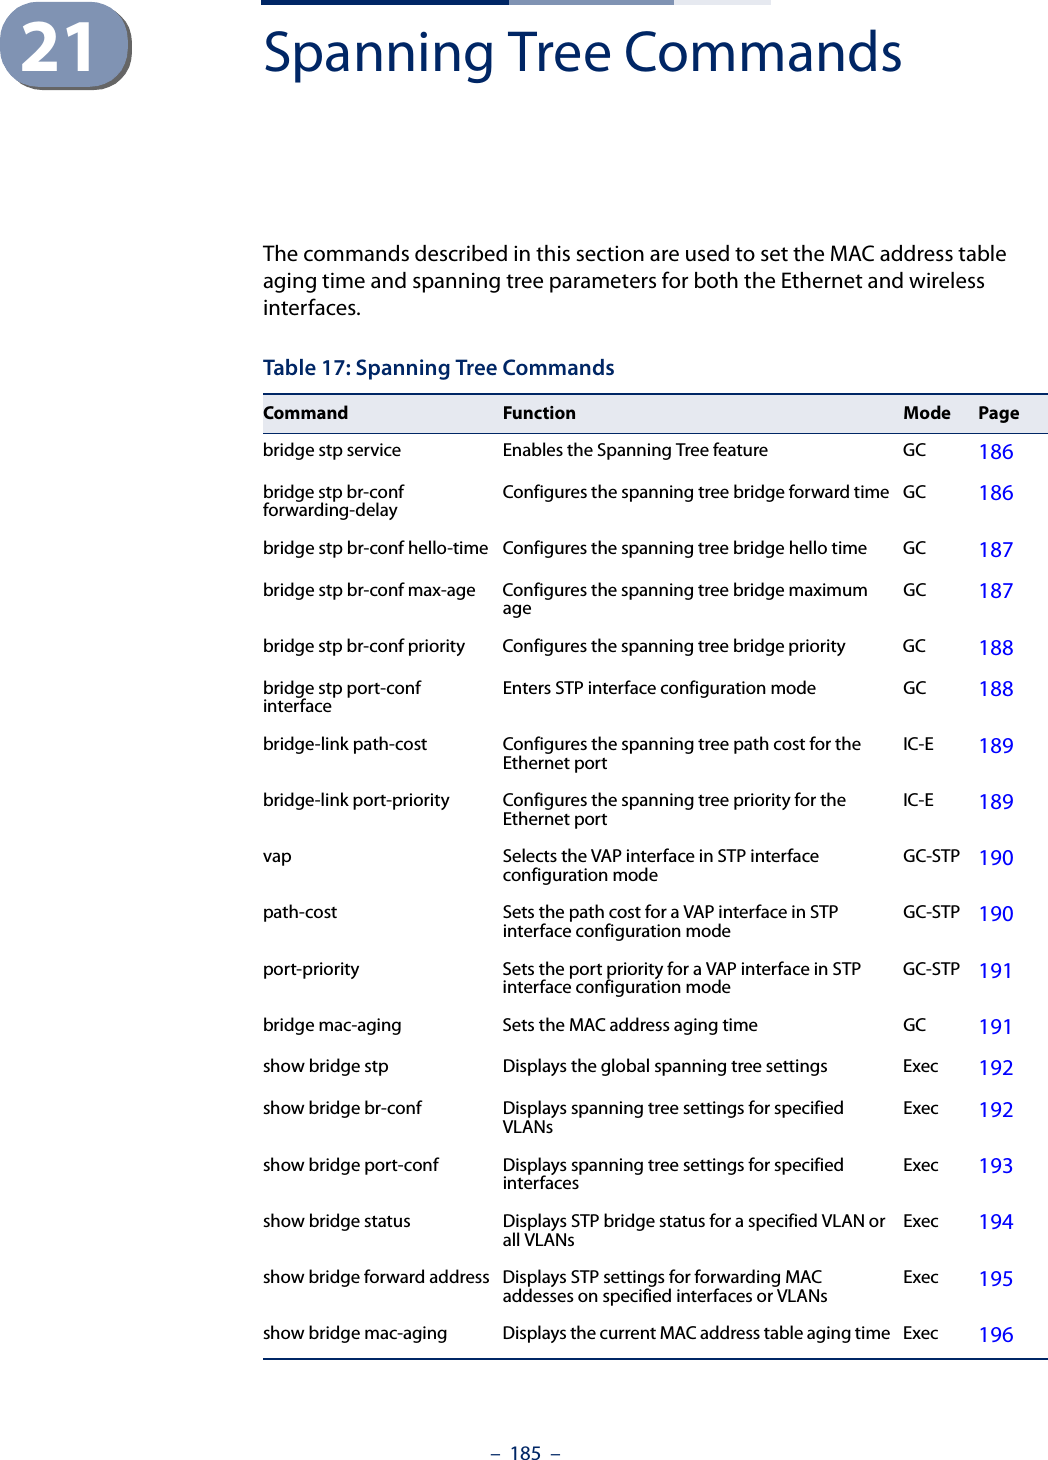 –  185  –21 Spanning Tree CommandsThe commands described in this section are used to set the MAC address table aging time and spanning tree parameters for both the Ethernet and wireless interfaces. Table 17: Spanning Tree CommandsCommand Function Mode Pagebridge stp service Enables the Spanning Tree feature GC 186bridge stp br-conf forwarding-delay Configures the spanning tree bridge forward time GC 186bridge stp br-conf hello-time Configures the spanning tree bridge hello time GC 187bridge stp br-conf max-age Configures the spanning tree bridge maximum age GC 187bridge stp br-conf priority Configures the spanning tree bridge priority GC 188bridge stp port-conf interface Enters STP interface configuration mode GC 188bridge-link path-cost Configures the spanning tree path cost for the Ethernet port IC-E 189bridge-link port-priority Configures the spanning tree priority for the Ethernet port IC-E 189vap Selects the VAP interface in STP interface configuration mode GC-STP 190path-cost Sets the path cost for a VAP interface in STP interface configuration mode GC-STP 190port-priority Sets the port priority for a VAP interface in STP interface configuration mode GC-STP 191bridge mac-aging Sets the MAC address aging time GC 191show bridge stp Displays the global spanning tree settings Exec 192show bridge br-conf Displays spanning tree settings for specified VLANs Exec 192show bridge port-conf Displays spanning tree settings for specified interfaces Exec 193show bridge status Displays STP bridge status for a specified VLAN or all VLANs Exec 194show bridge forward address Displays STP settings for forwarding MAC addesses on specified interfaces or VLANs Exec 195show bridge mac-aging Displays the current MAC address table aging time Exec 196